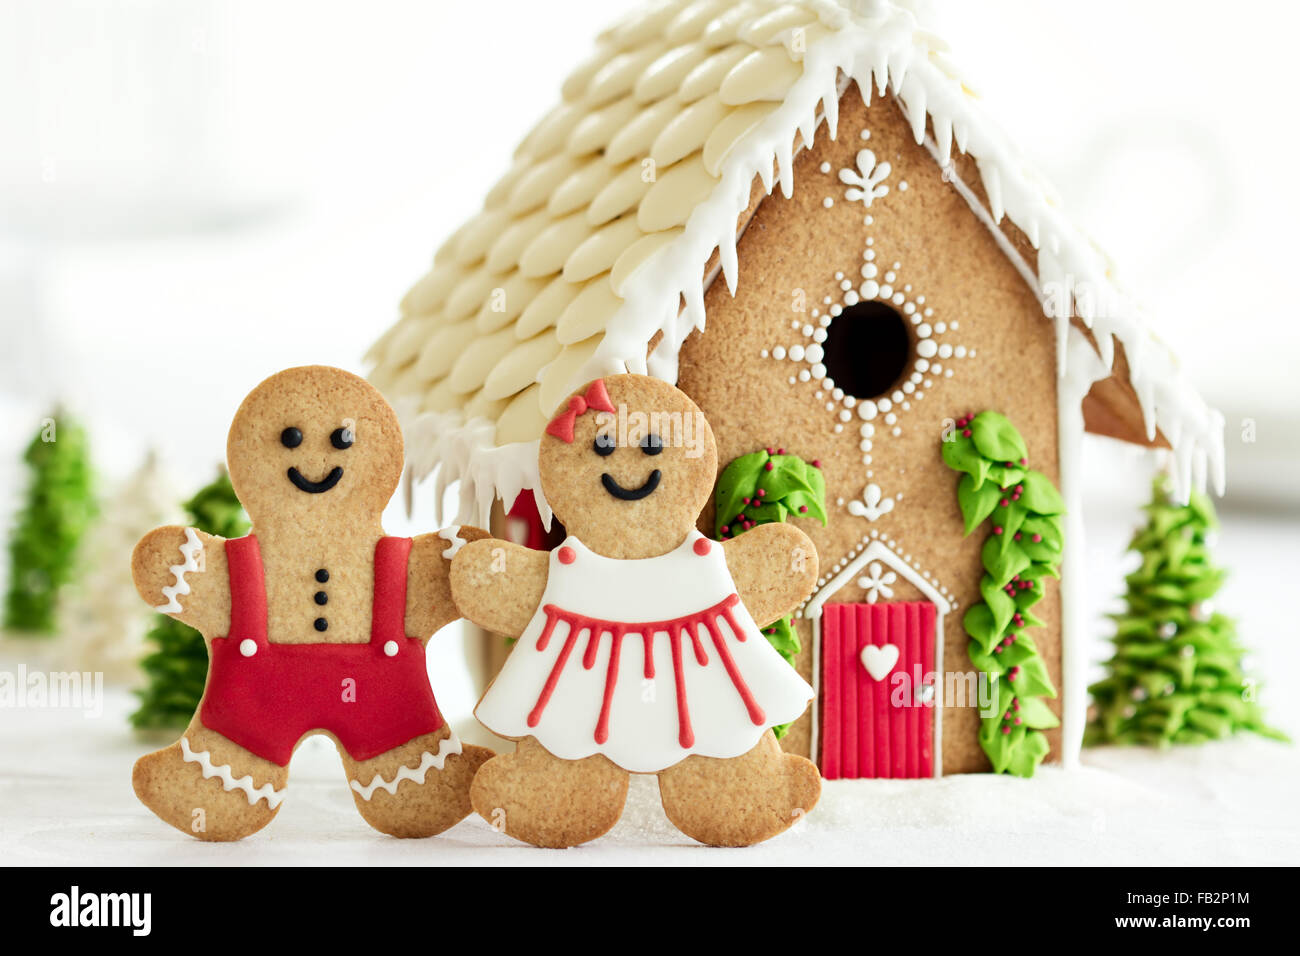 Gingerbread house with gingerbread couple in front Stock Photo